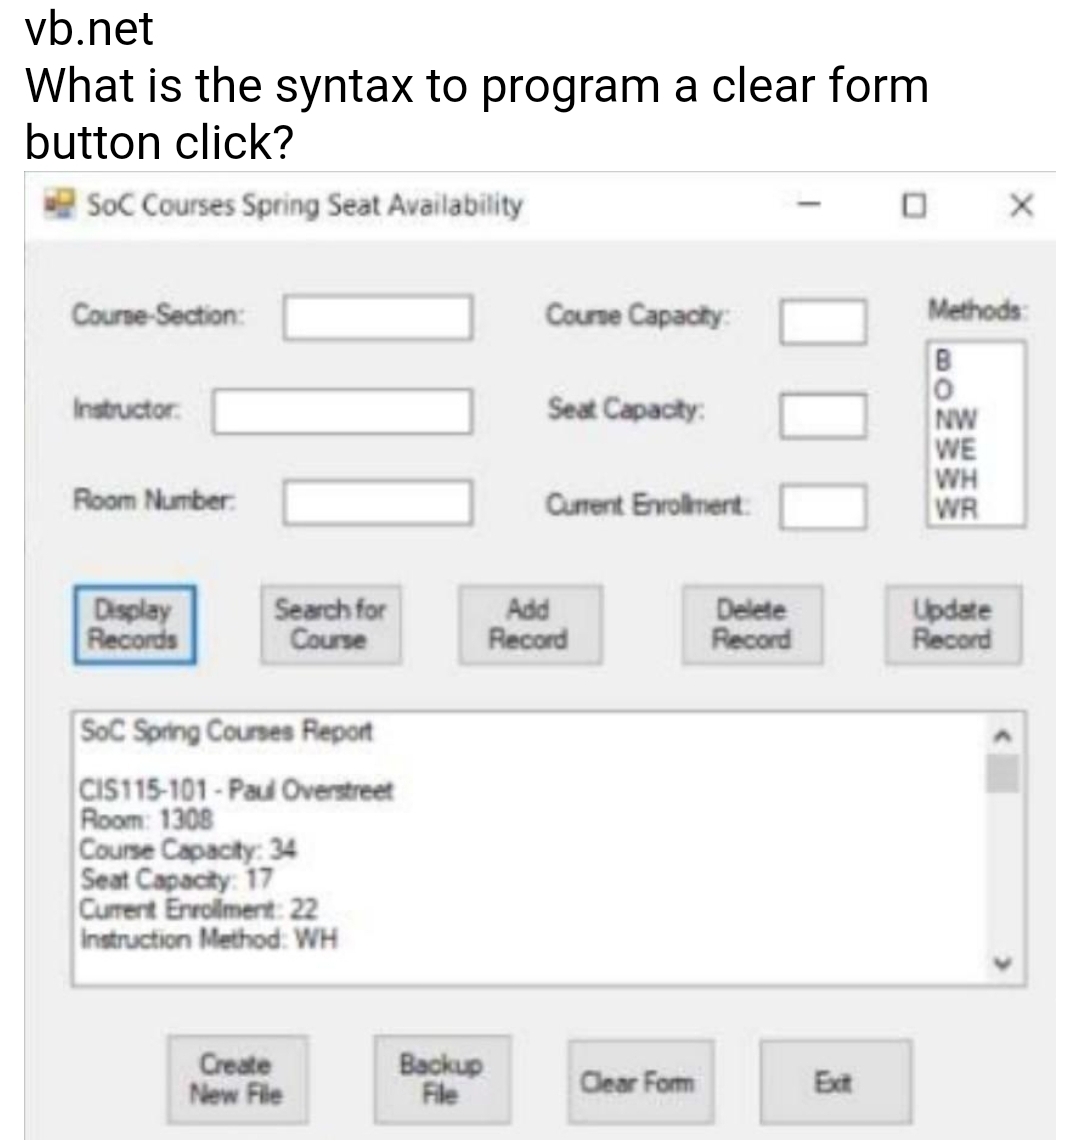 vb.net
What is the syntax to program a clear form
button click?
|SoC Courses Spring Seat Availability
Coune Capacty:
Methods:
Course-Section:
B
Instructor.
Seat Capacity:
NW
WE
WH
WR
Room Number:
Current Envolmert
Display
Records
Search for
Course
Add
Record
Delete
Record
Update
Record
SoC Spring Courses Report
CIS115-101-Paul Overstreet
Room: 1308
Course Capacity: 34
Seat Capacity: 17
Curent Enrolment 22
Instruction Method: WH
Create
New File
Backup
File
Clear Fom
Ext
